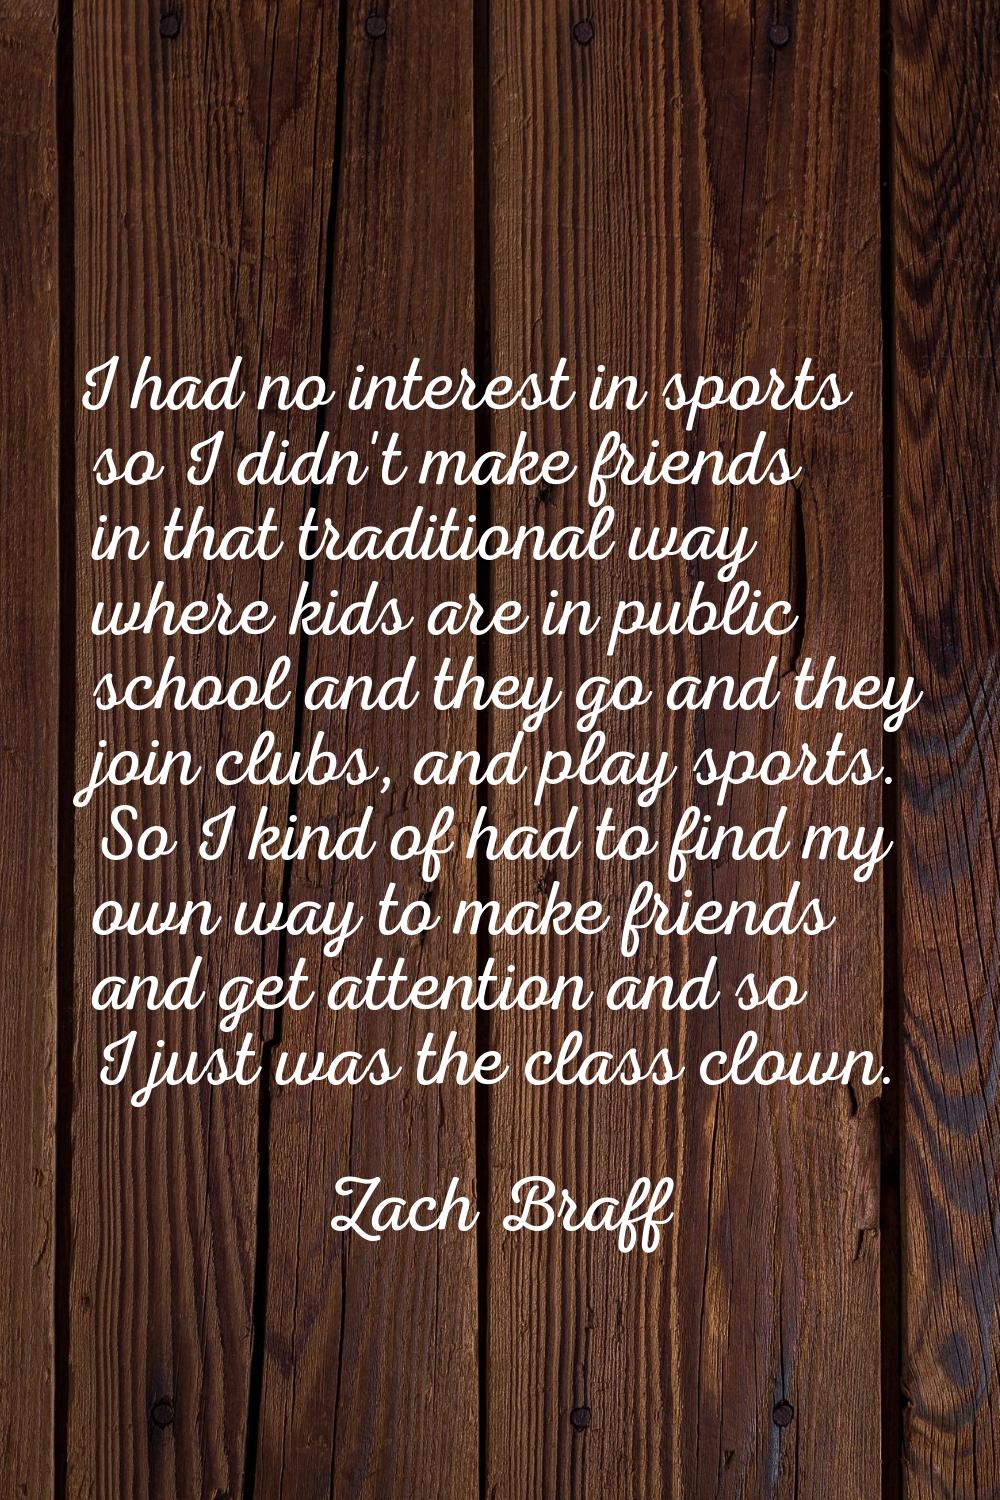 I had no interest in sports so I didn't make friends in that traditional way where kids are in publ